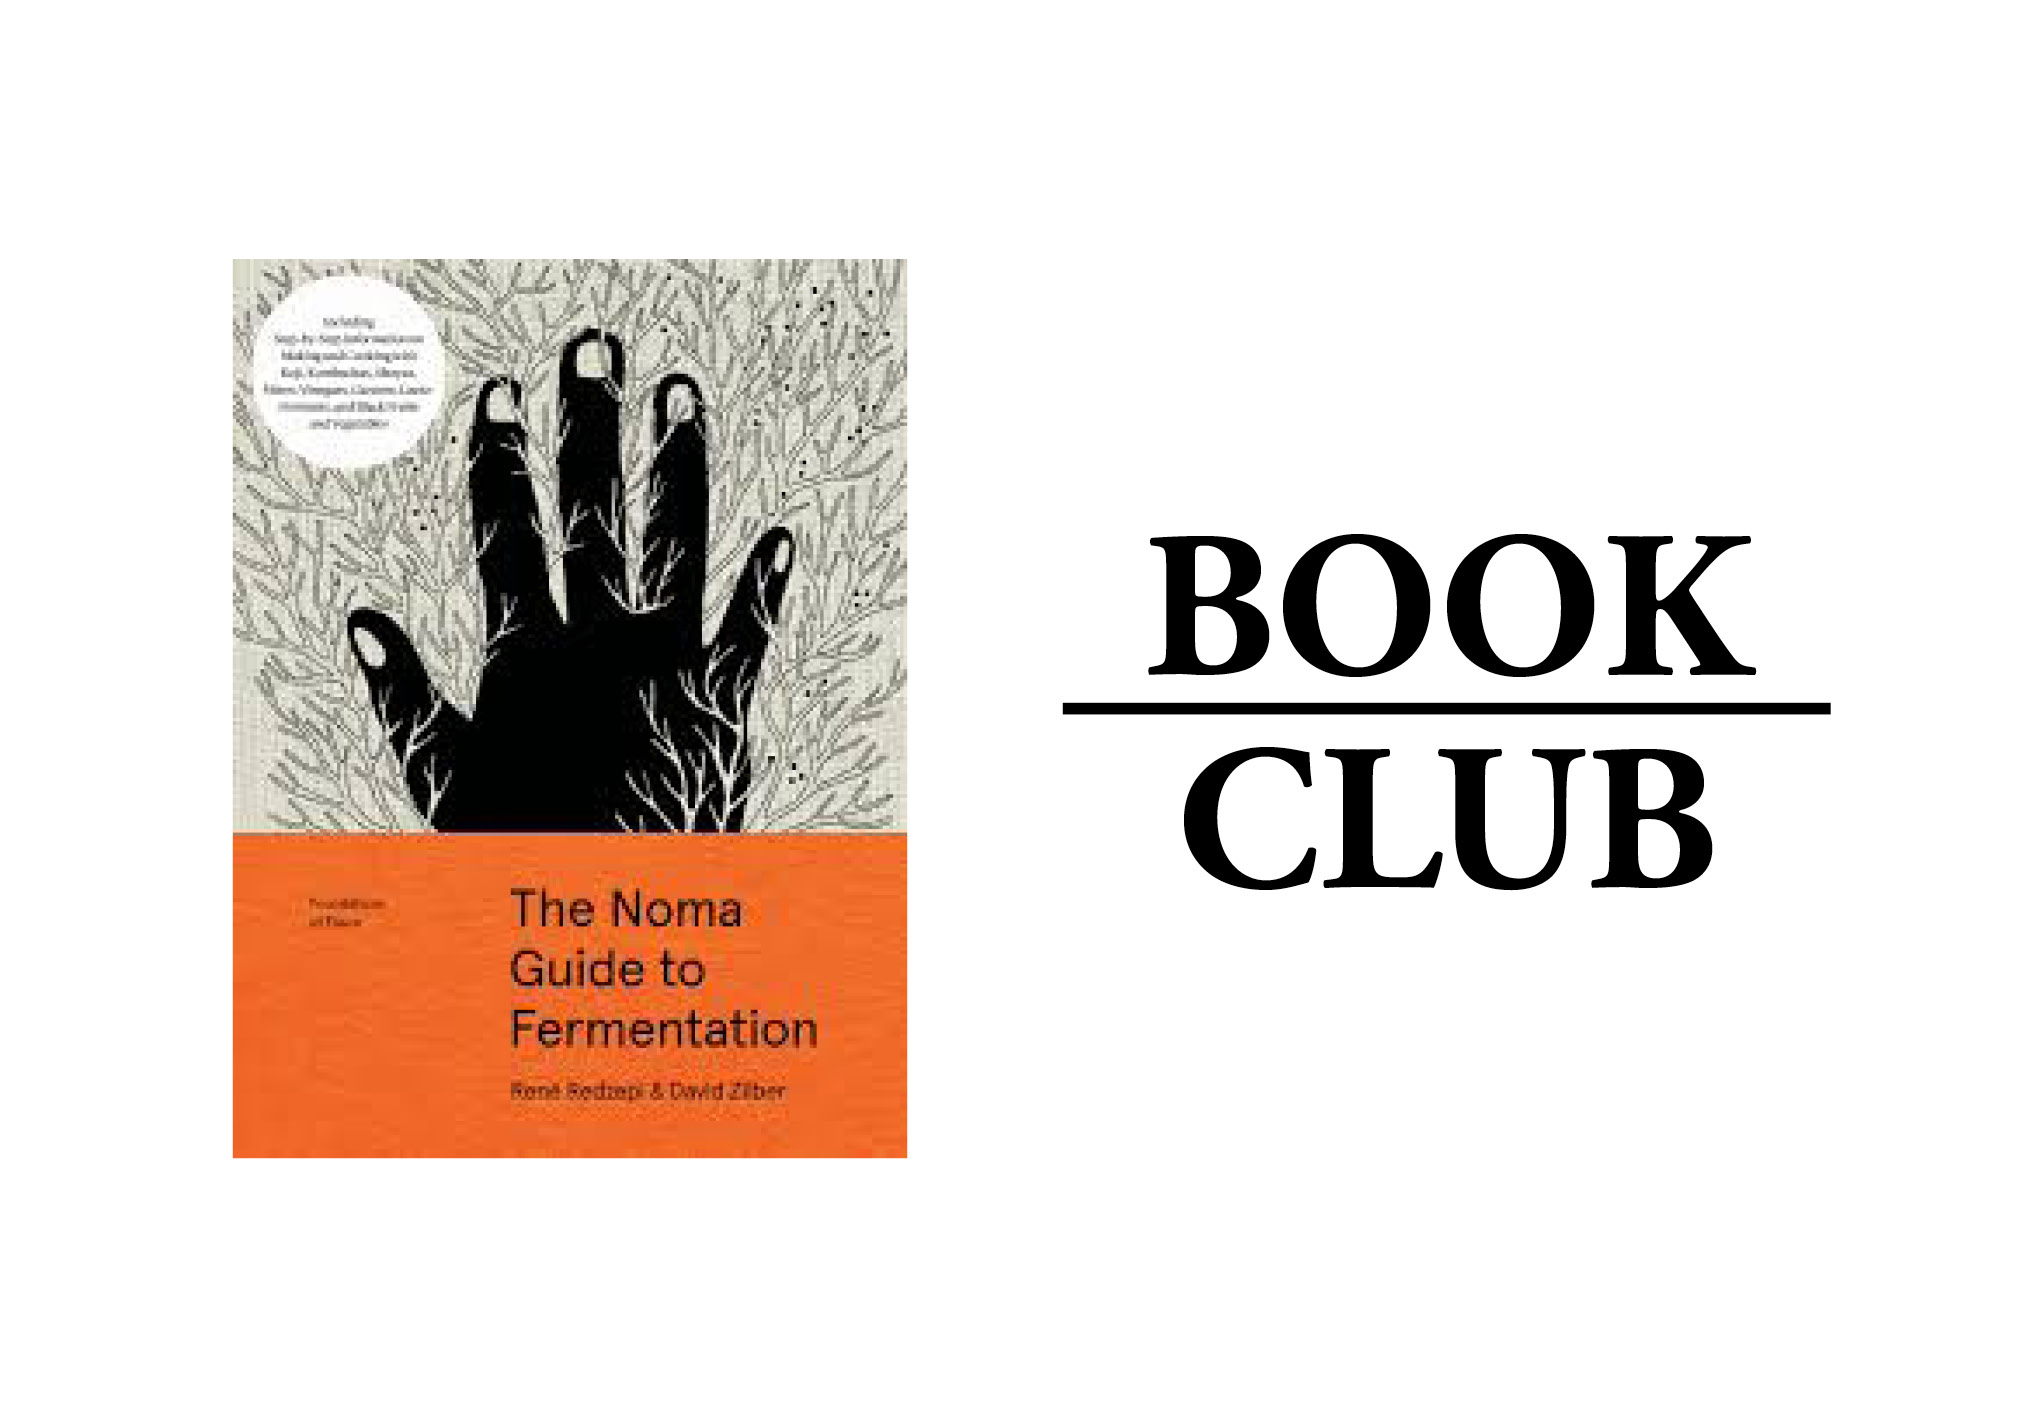 FOUNDATIONS OF FLAVOR: THE NOMA GUIDE TO FERMENTATION By René Redzepi and David Zilber